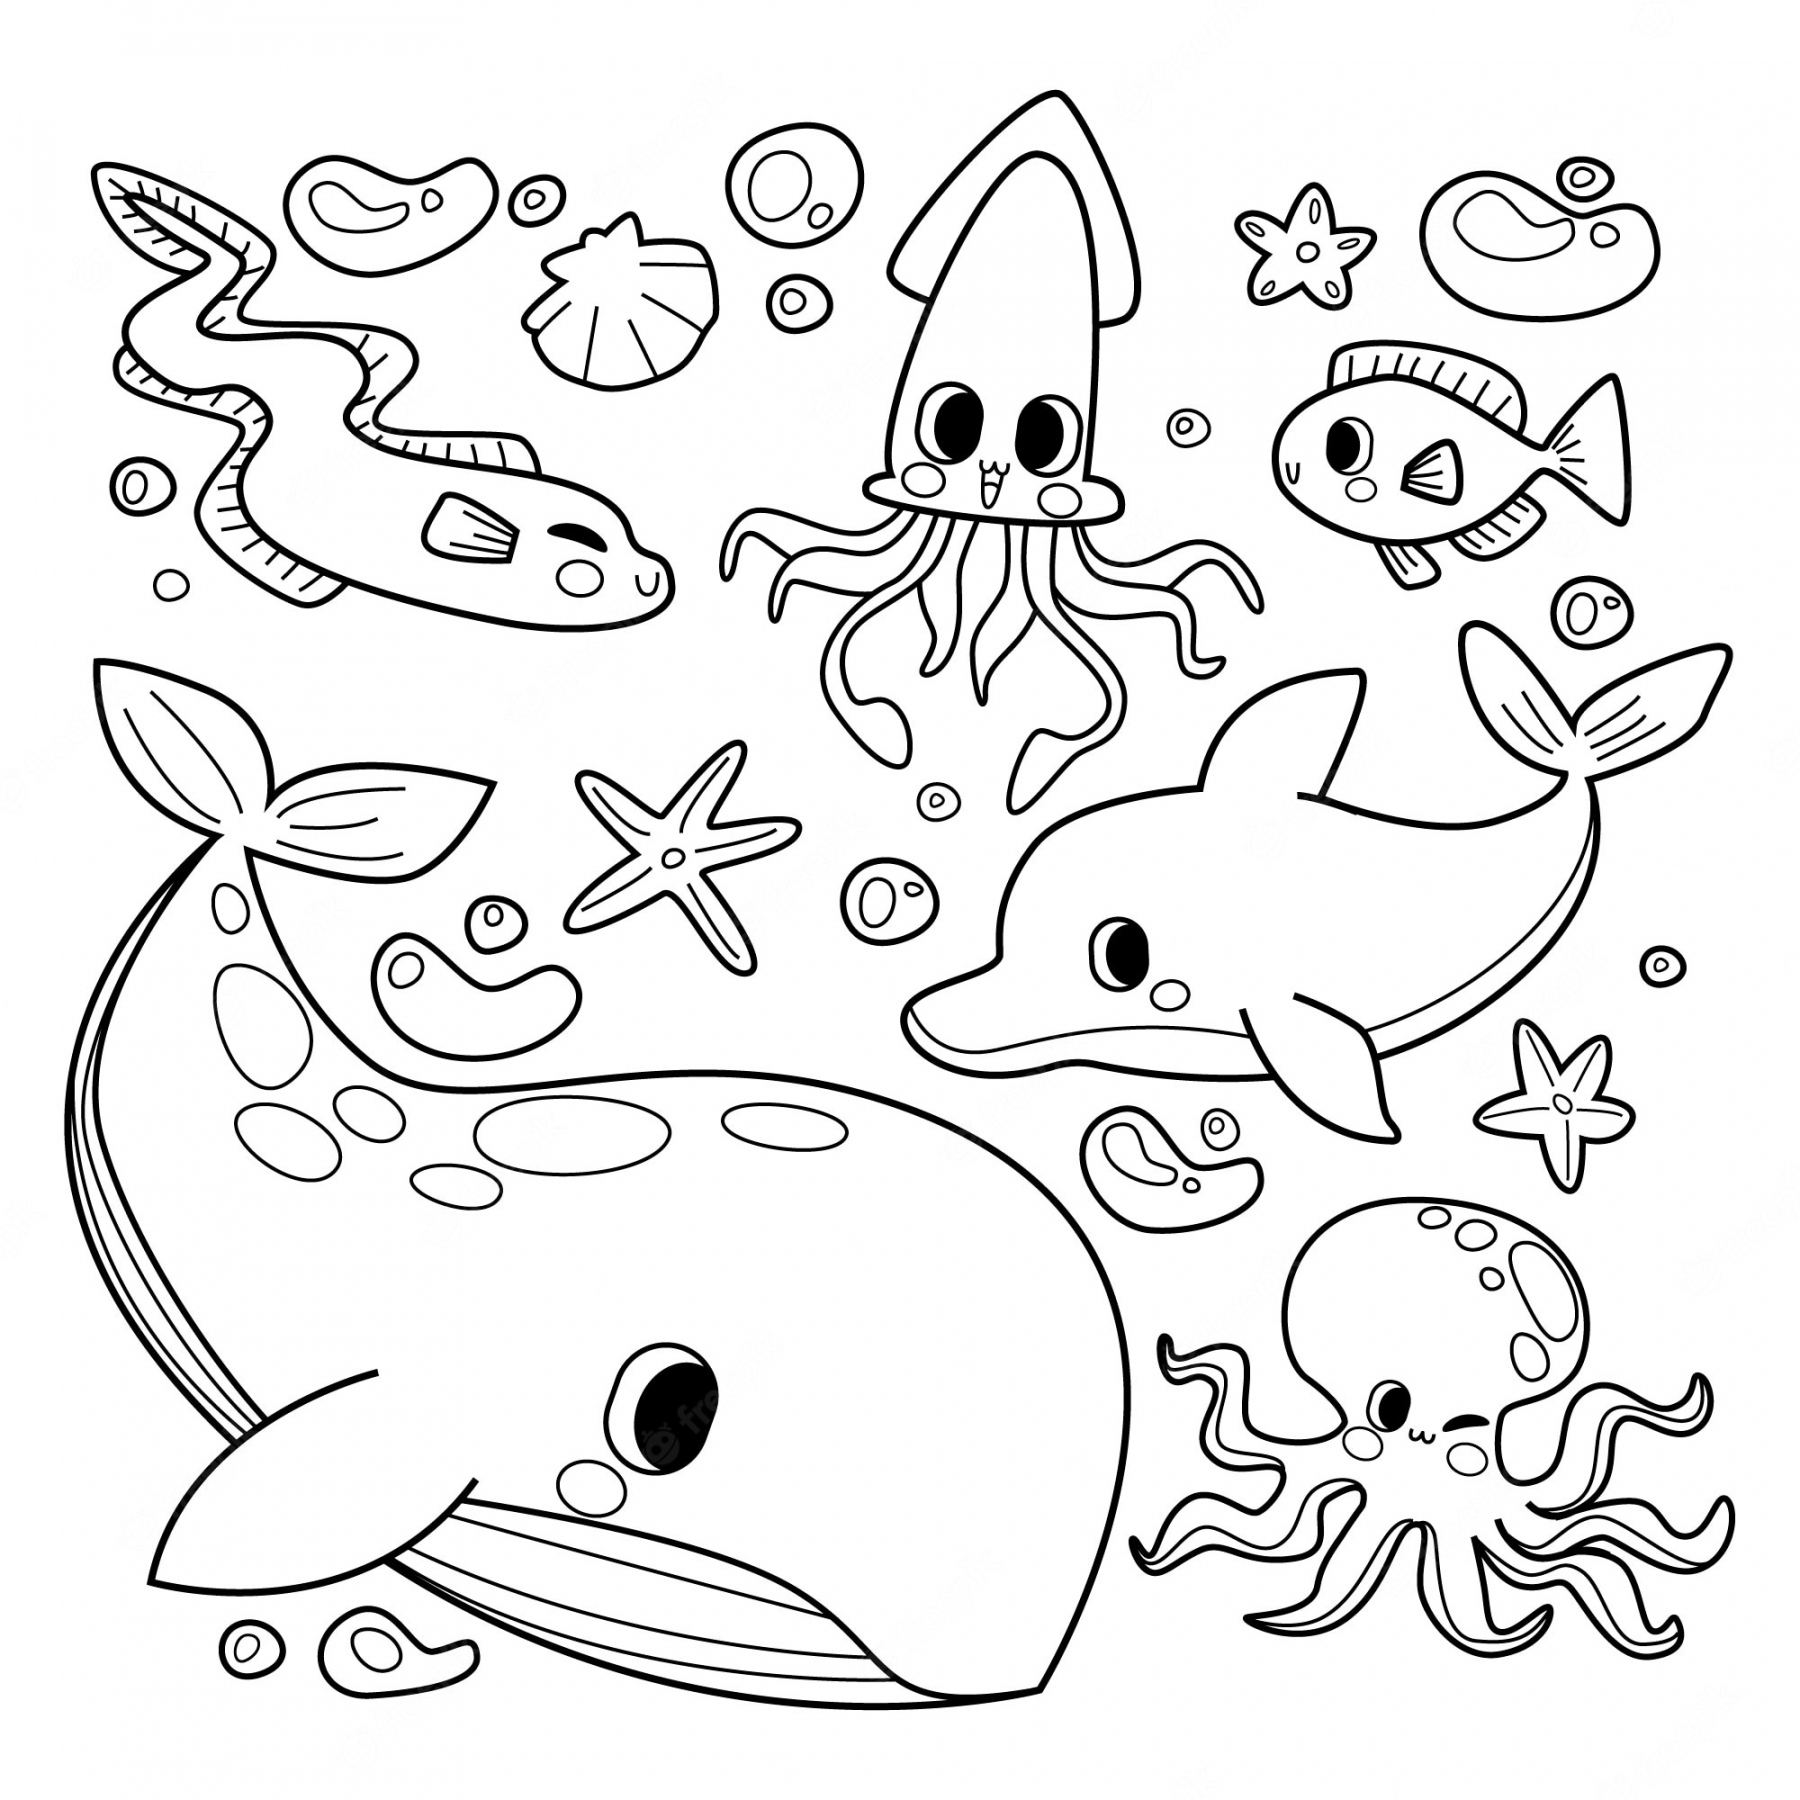 Printable Coloring Sheets Free - Printable - Coloring Pages Images - Free Download on Freepik